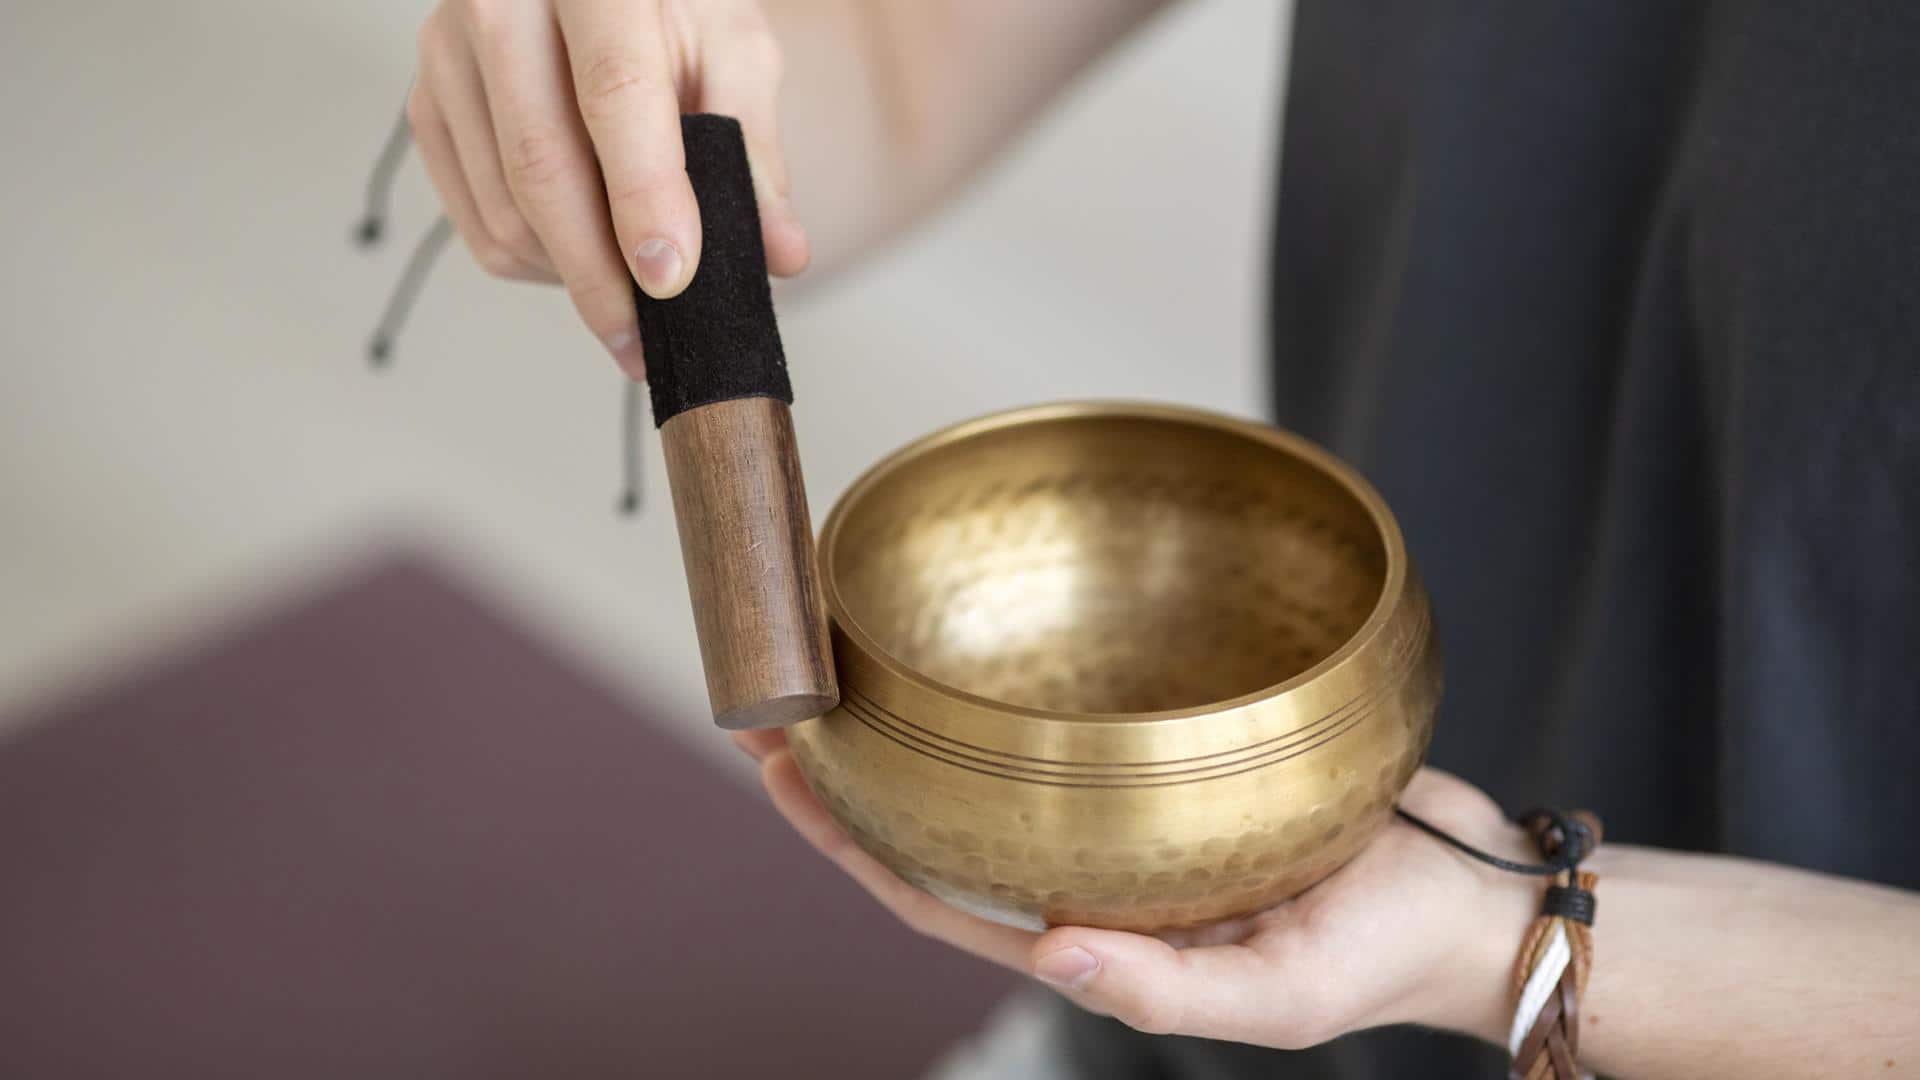 Tibetan singing bowls: How they work and benefits they offer